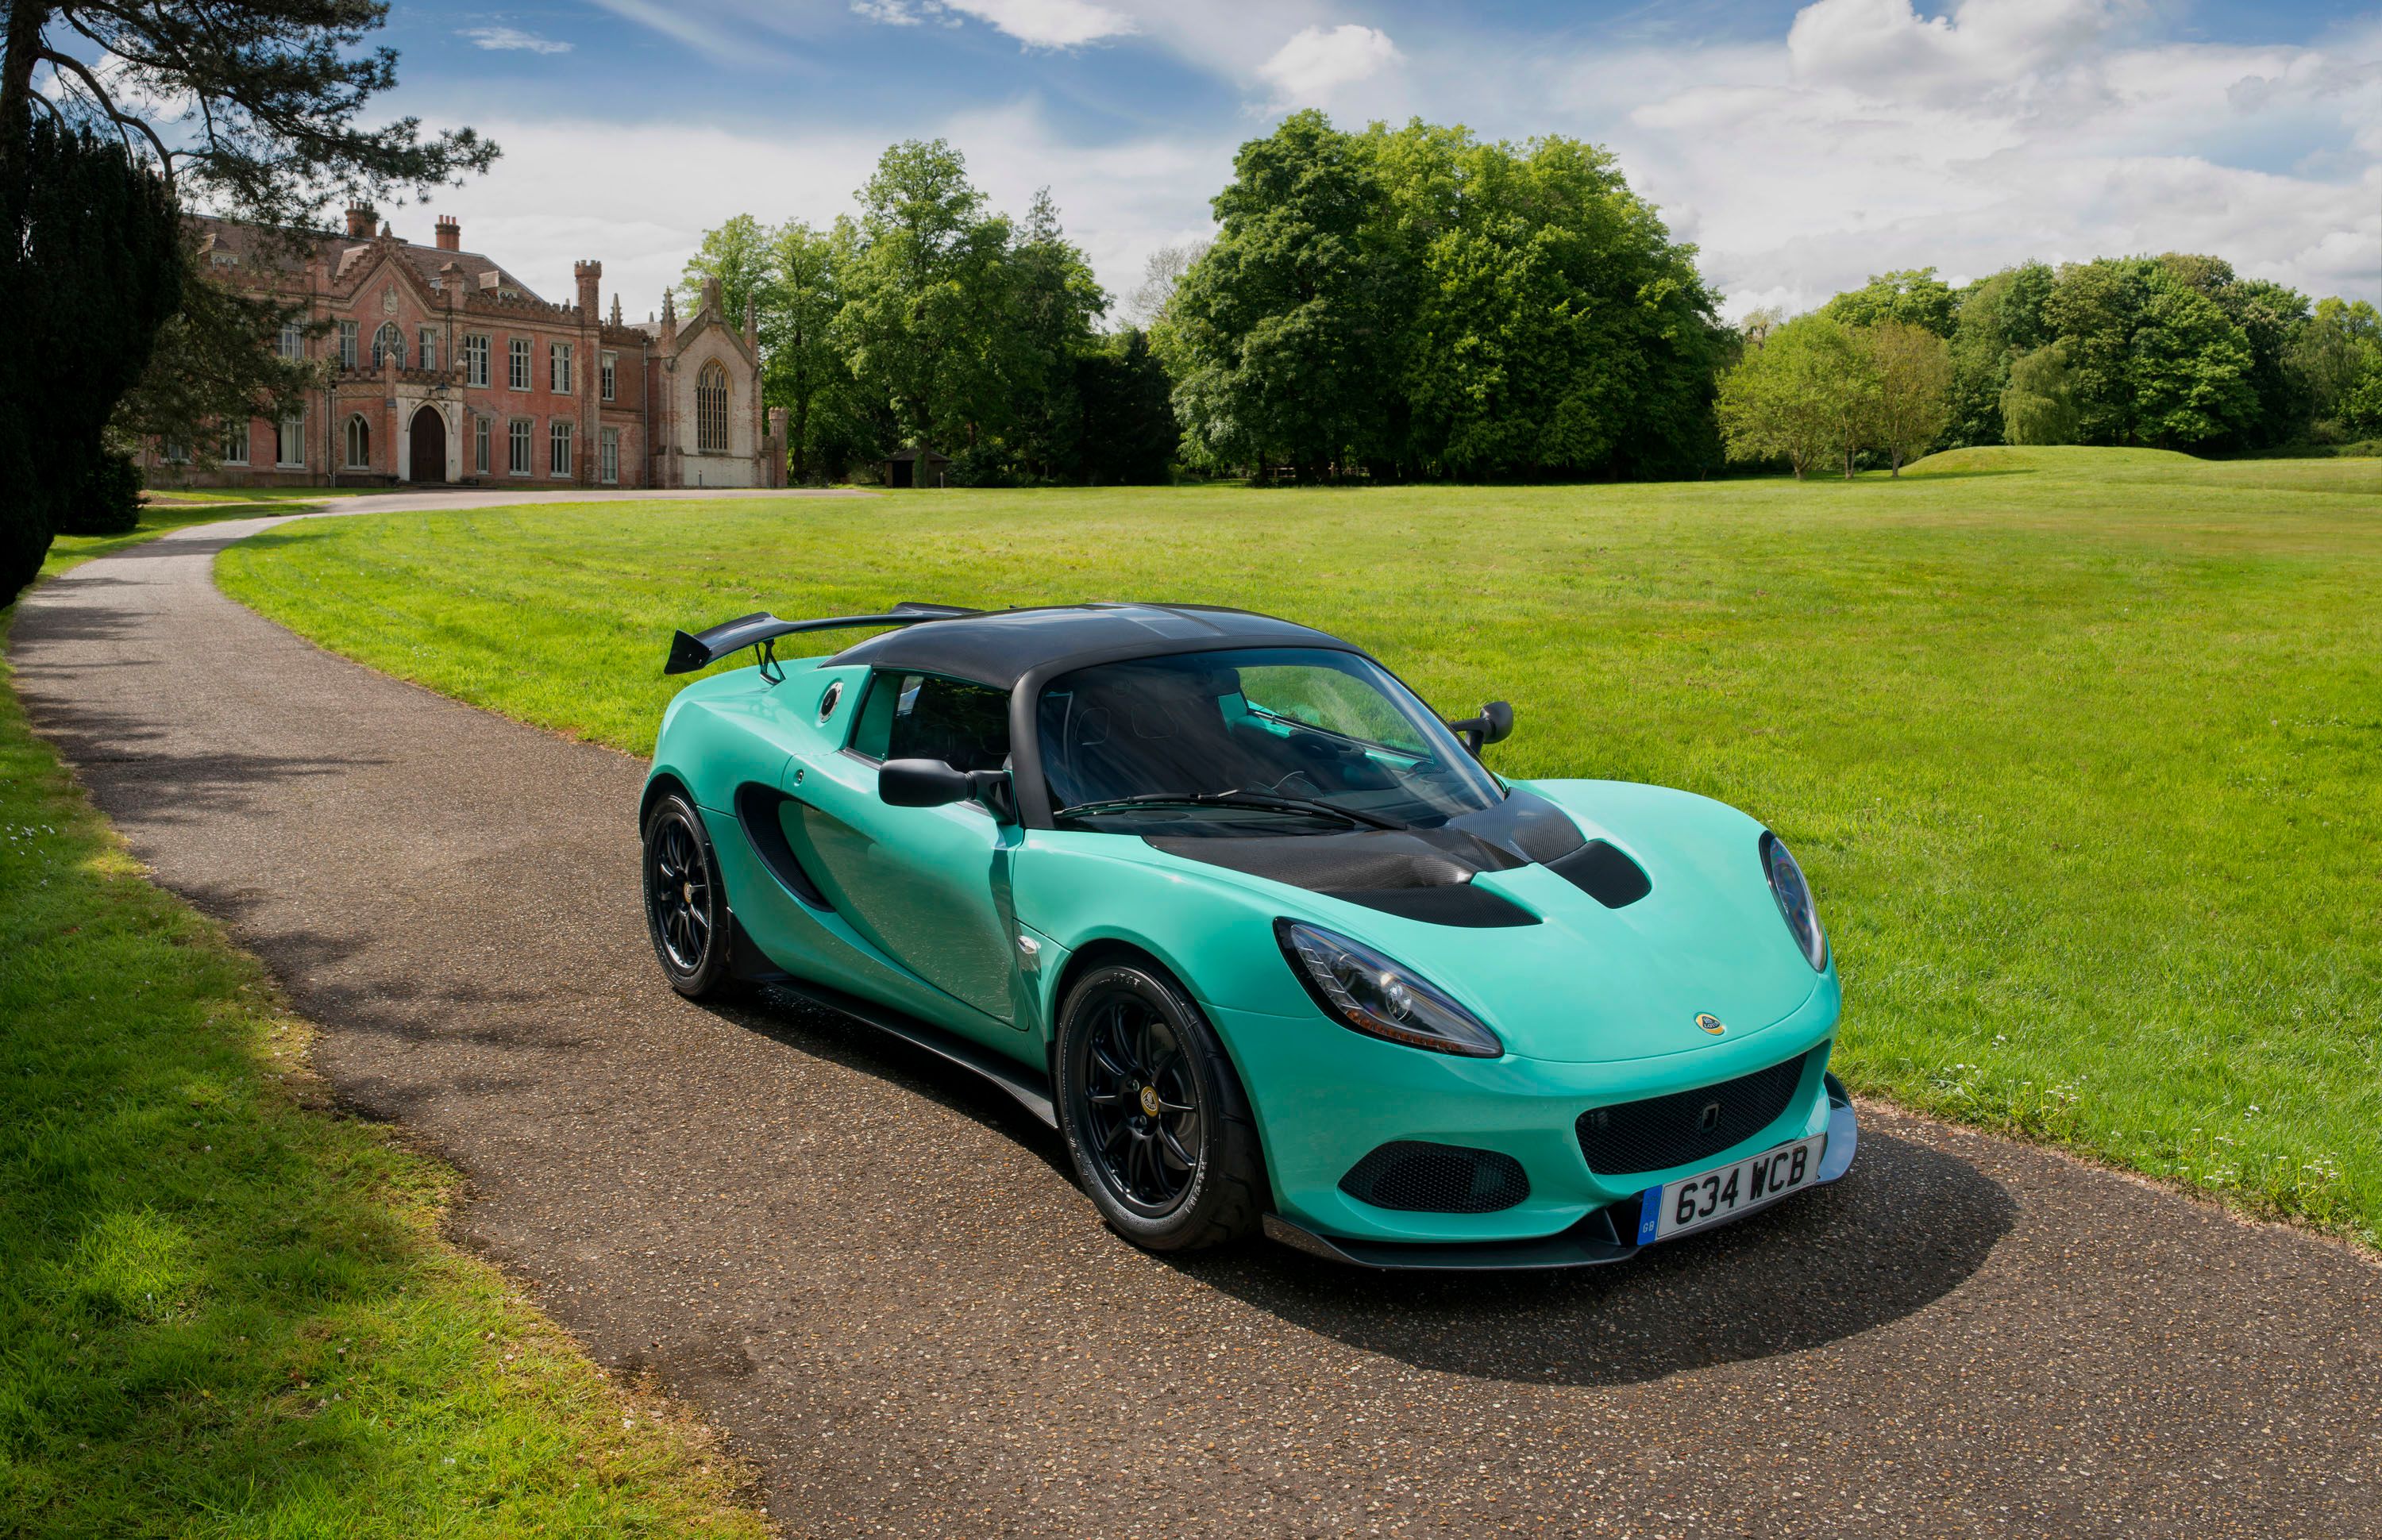 2021 The Lotus Elise Could Live On, Maybe Even As The Toyota MR2